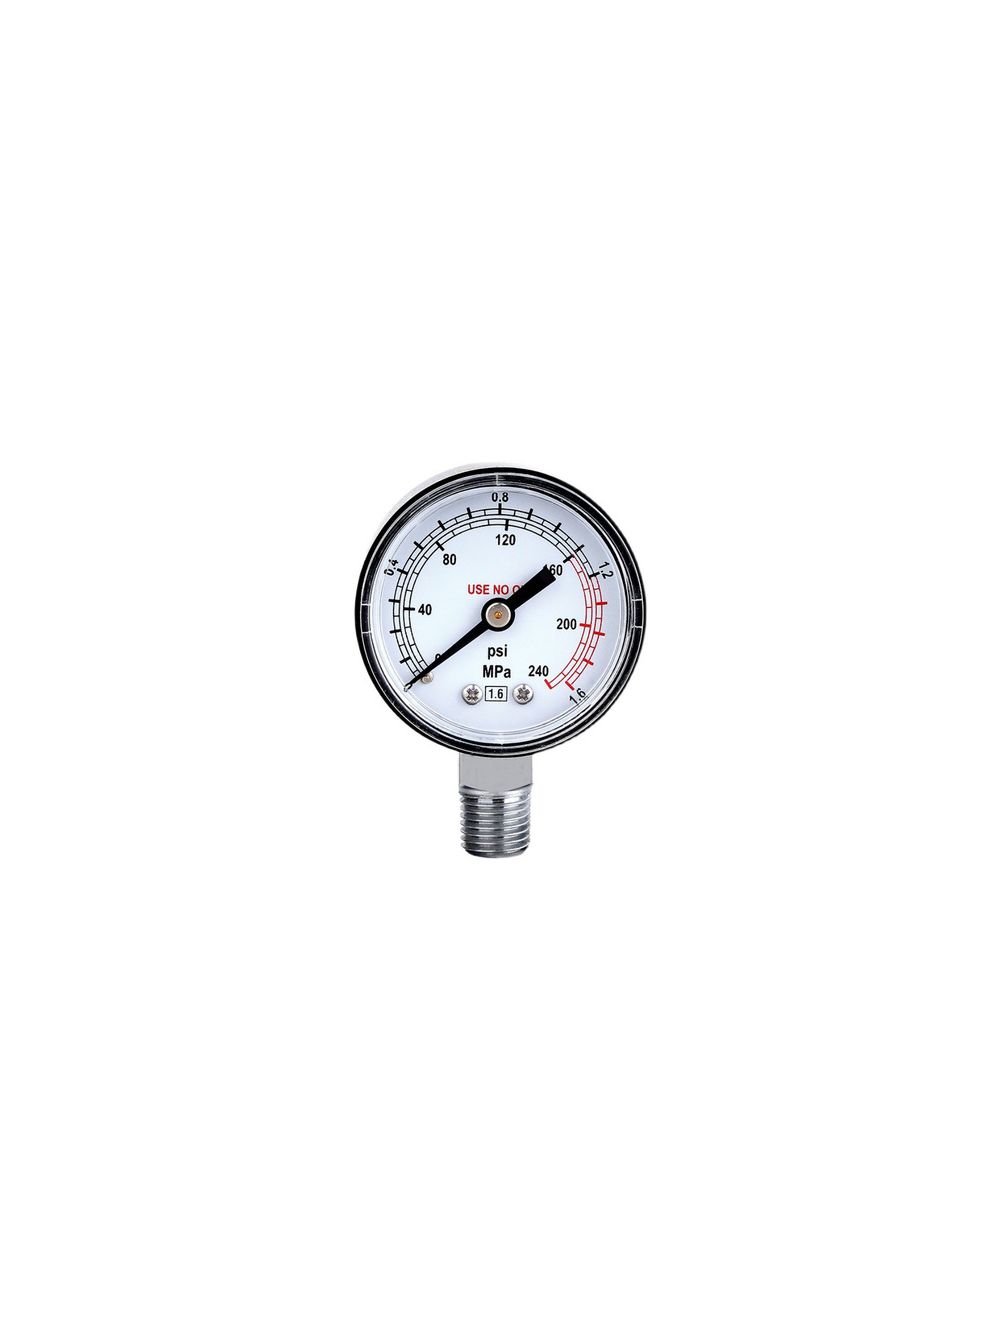 New In stock for sale, AEROTECH Pressure Gauge AR 0.6MPA